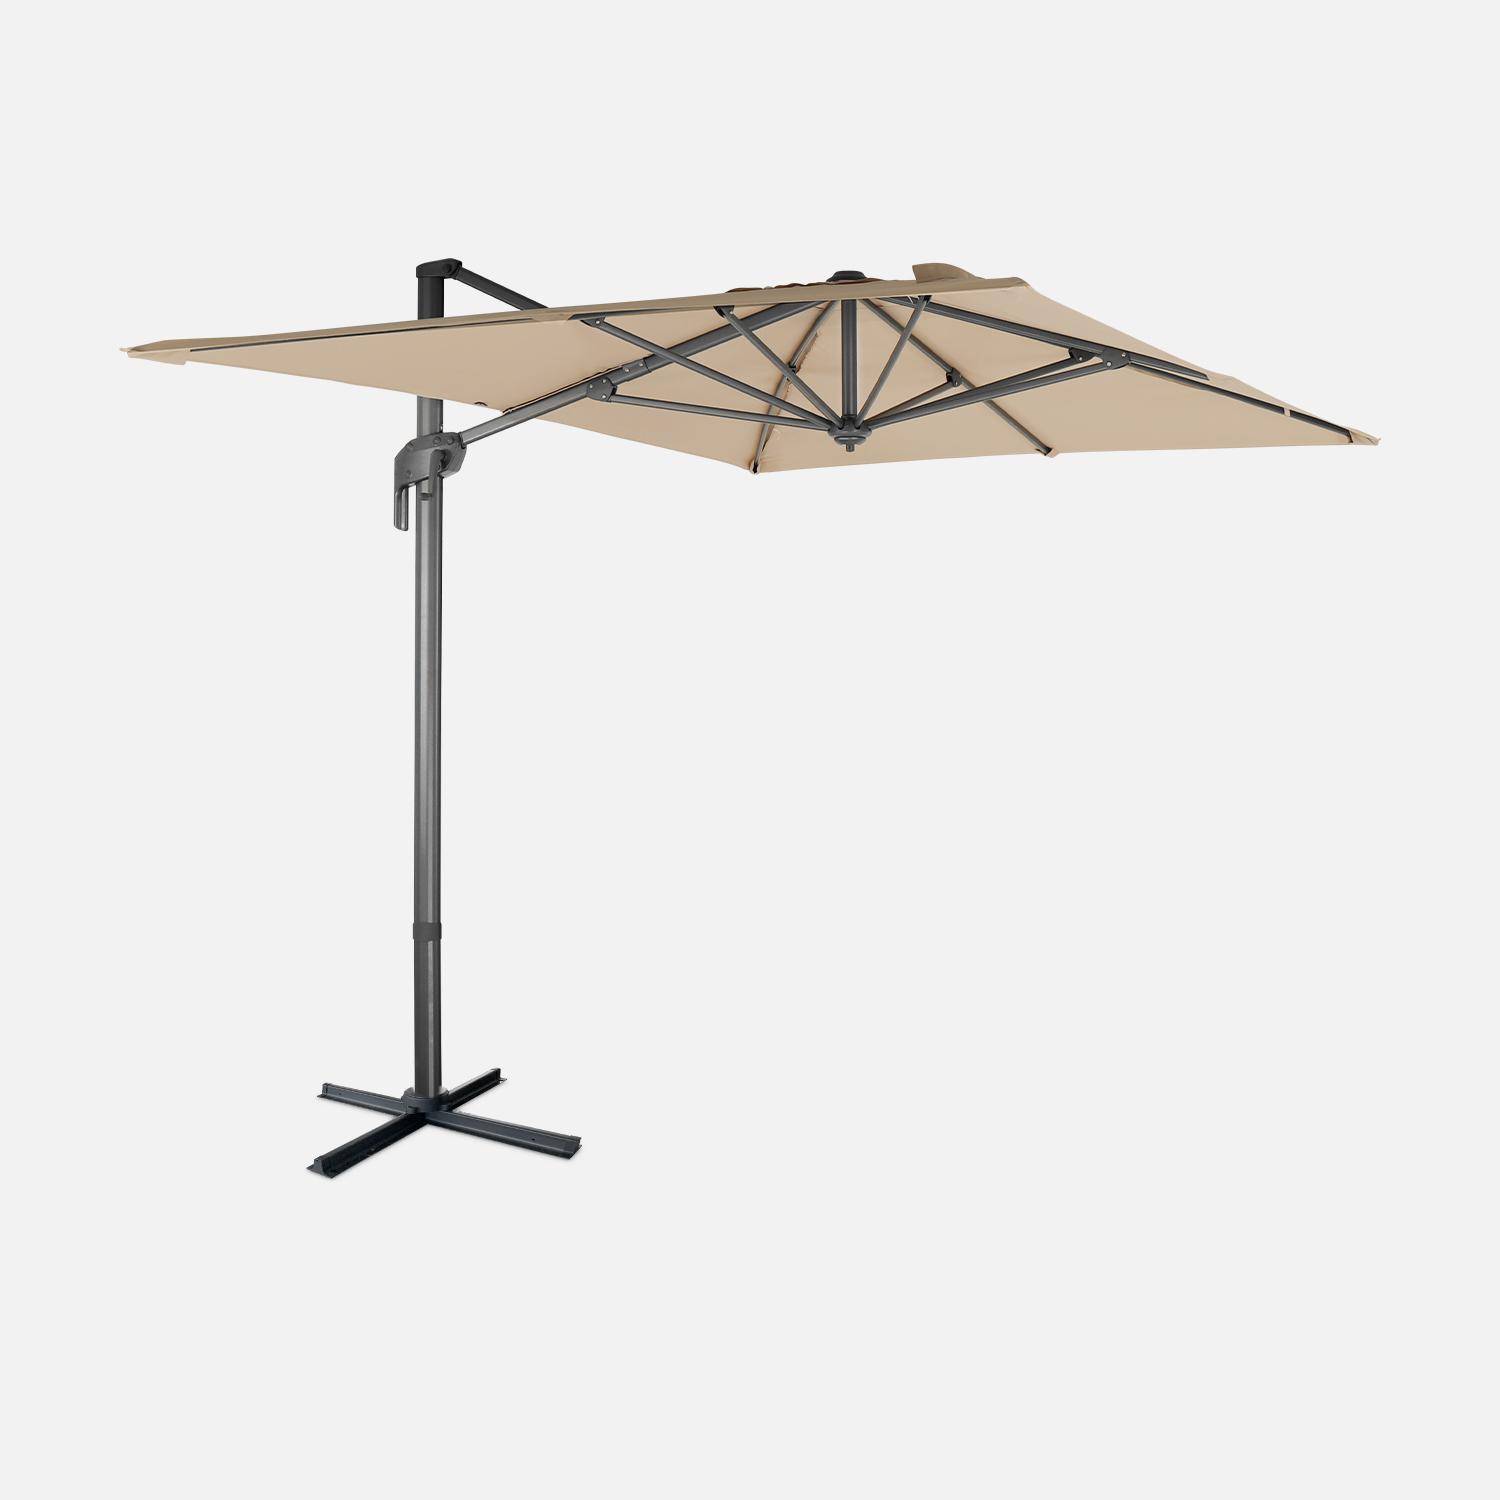 2x3m rectangular cantilever paraso - parasol can be tilted, folded and rotated 360 degreesl - Antibes - Beige,sweeek,Photo2